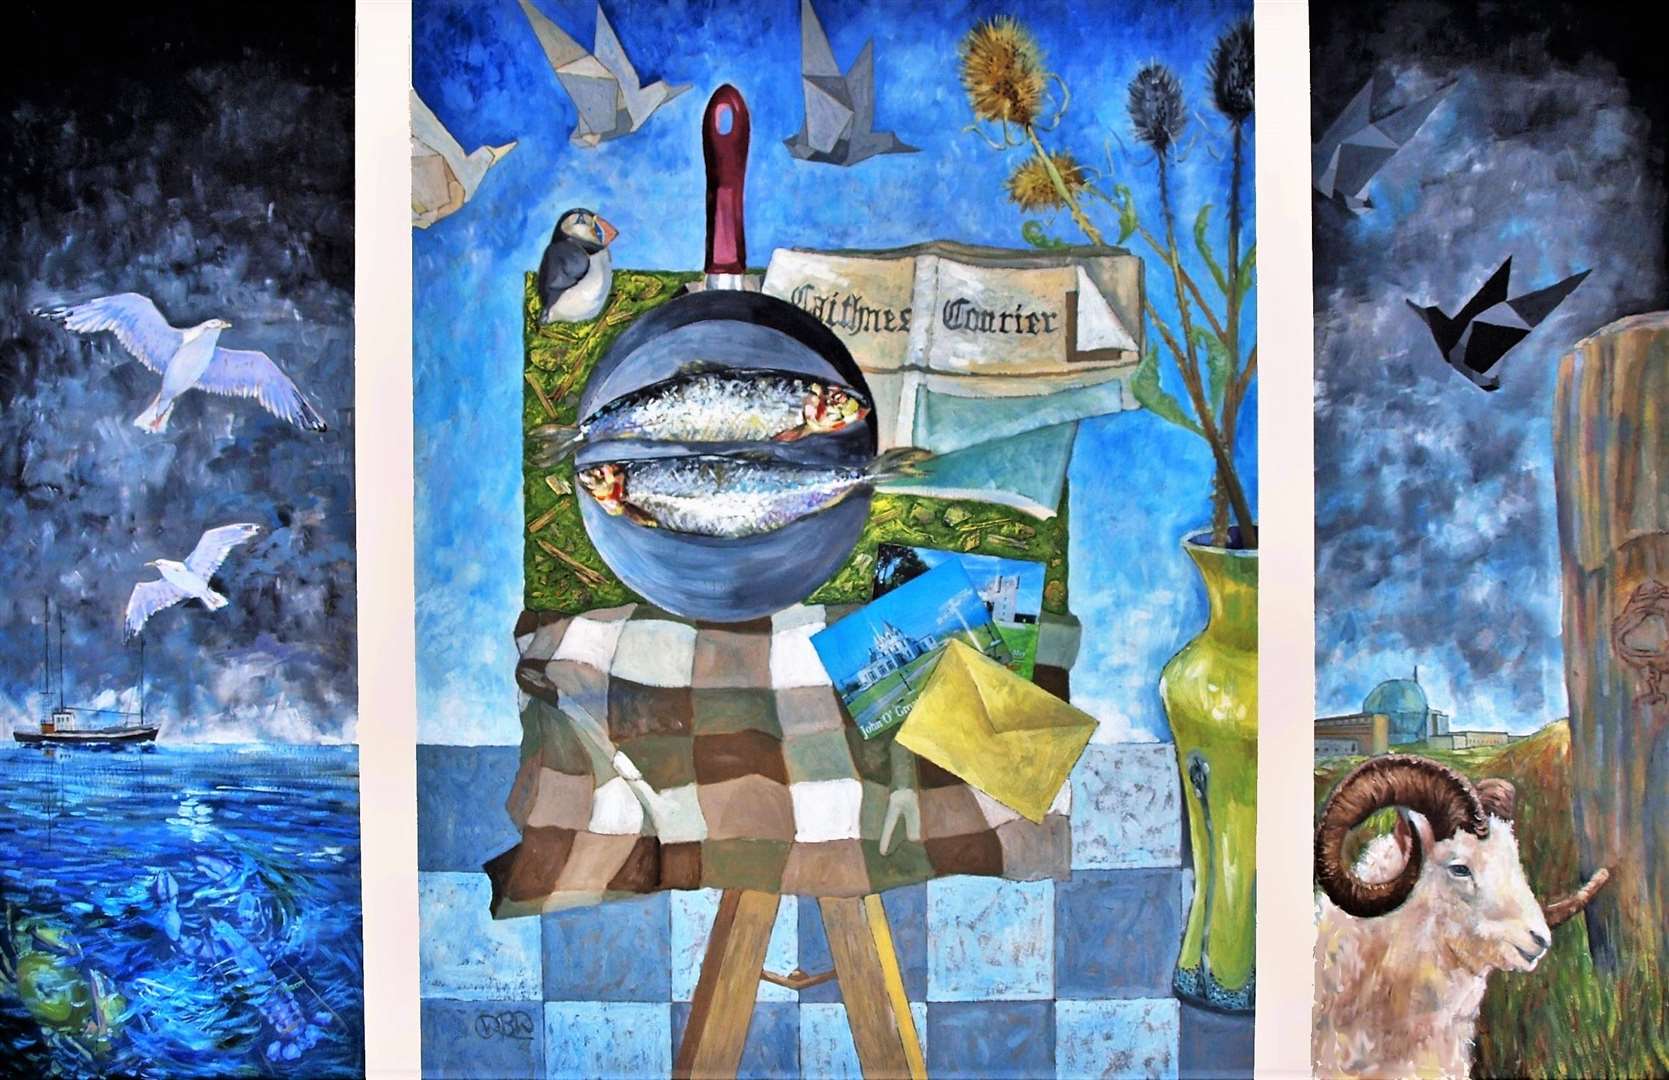 Painting by William Wallace Aspects of the Caithness triptych, oil on panel.  It incorporates a copy of the Caithness Courier in the center panel.